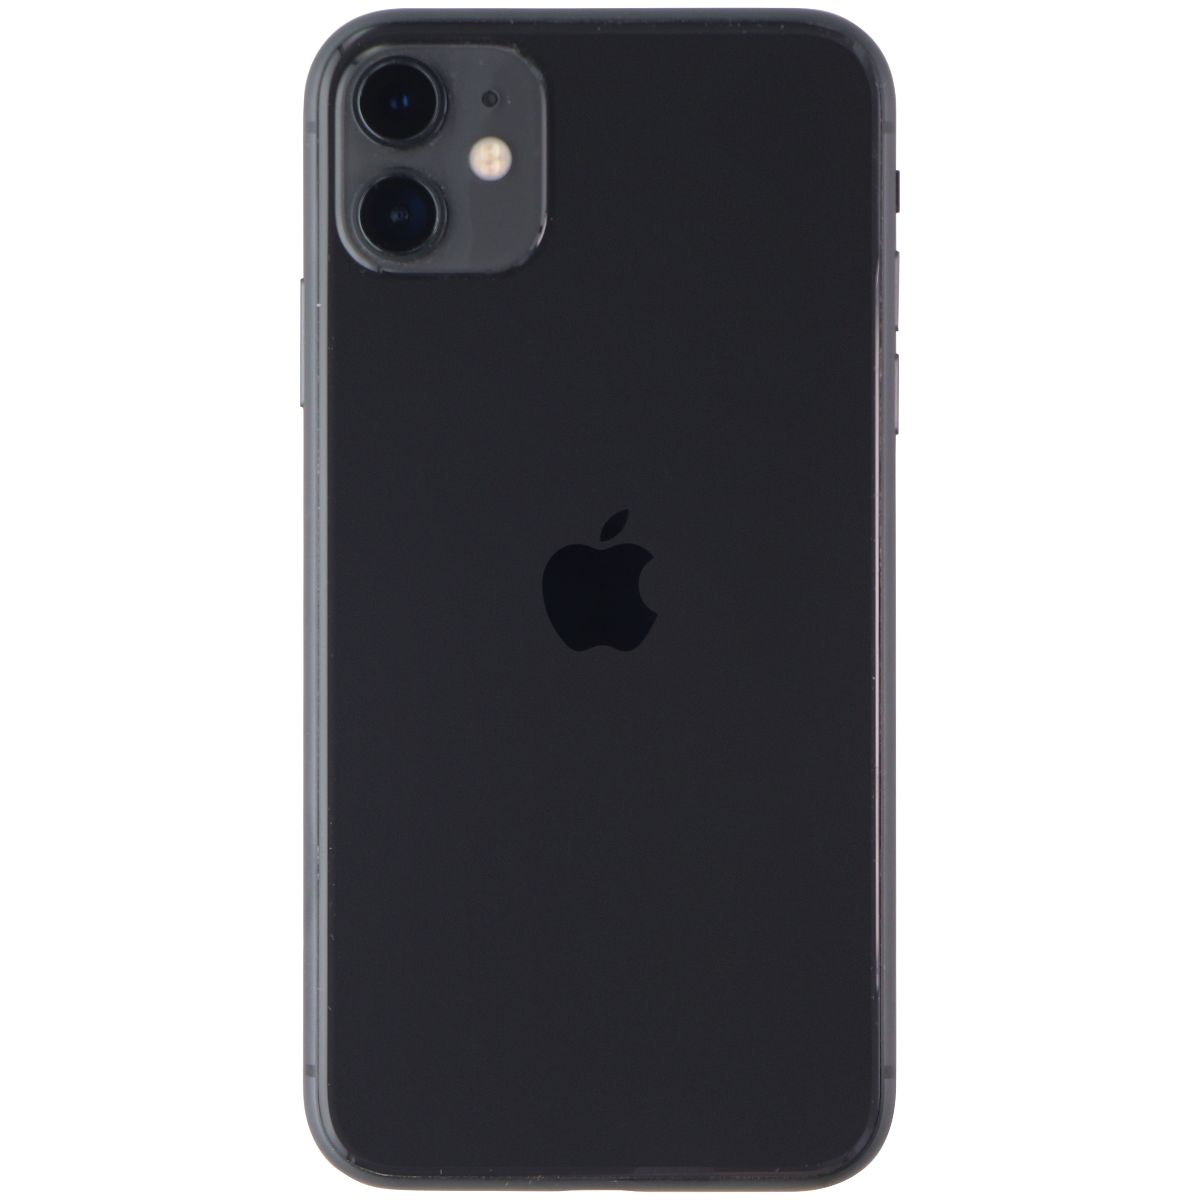 Apple iPhone 11 (6.1-inch) Smartphone (A2111) SPECTRUM ONLY - 64GB / Black Cell Phones & Smartphones Apple    - Simple Cell Bulk Wholesale Pricing - USA Seller